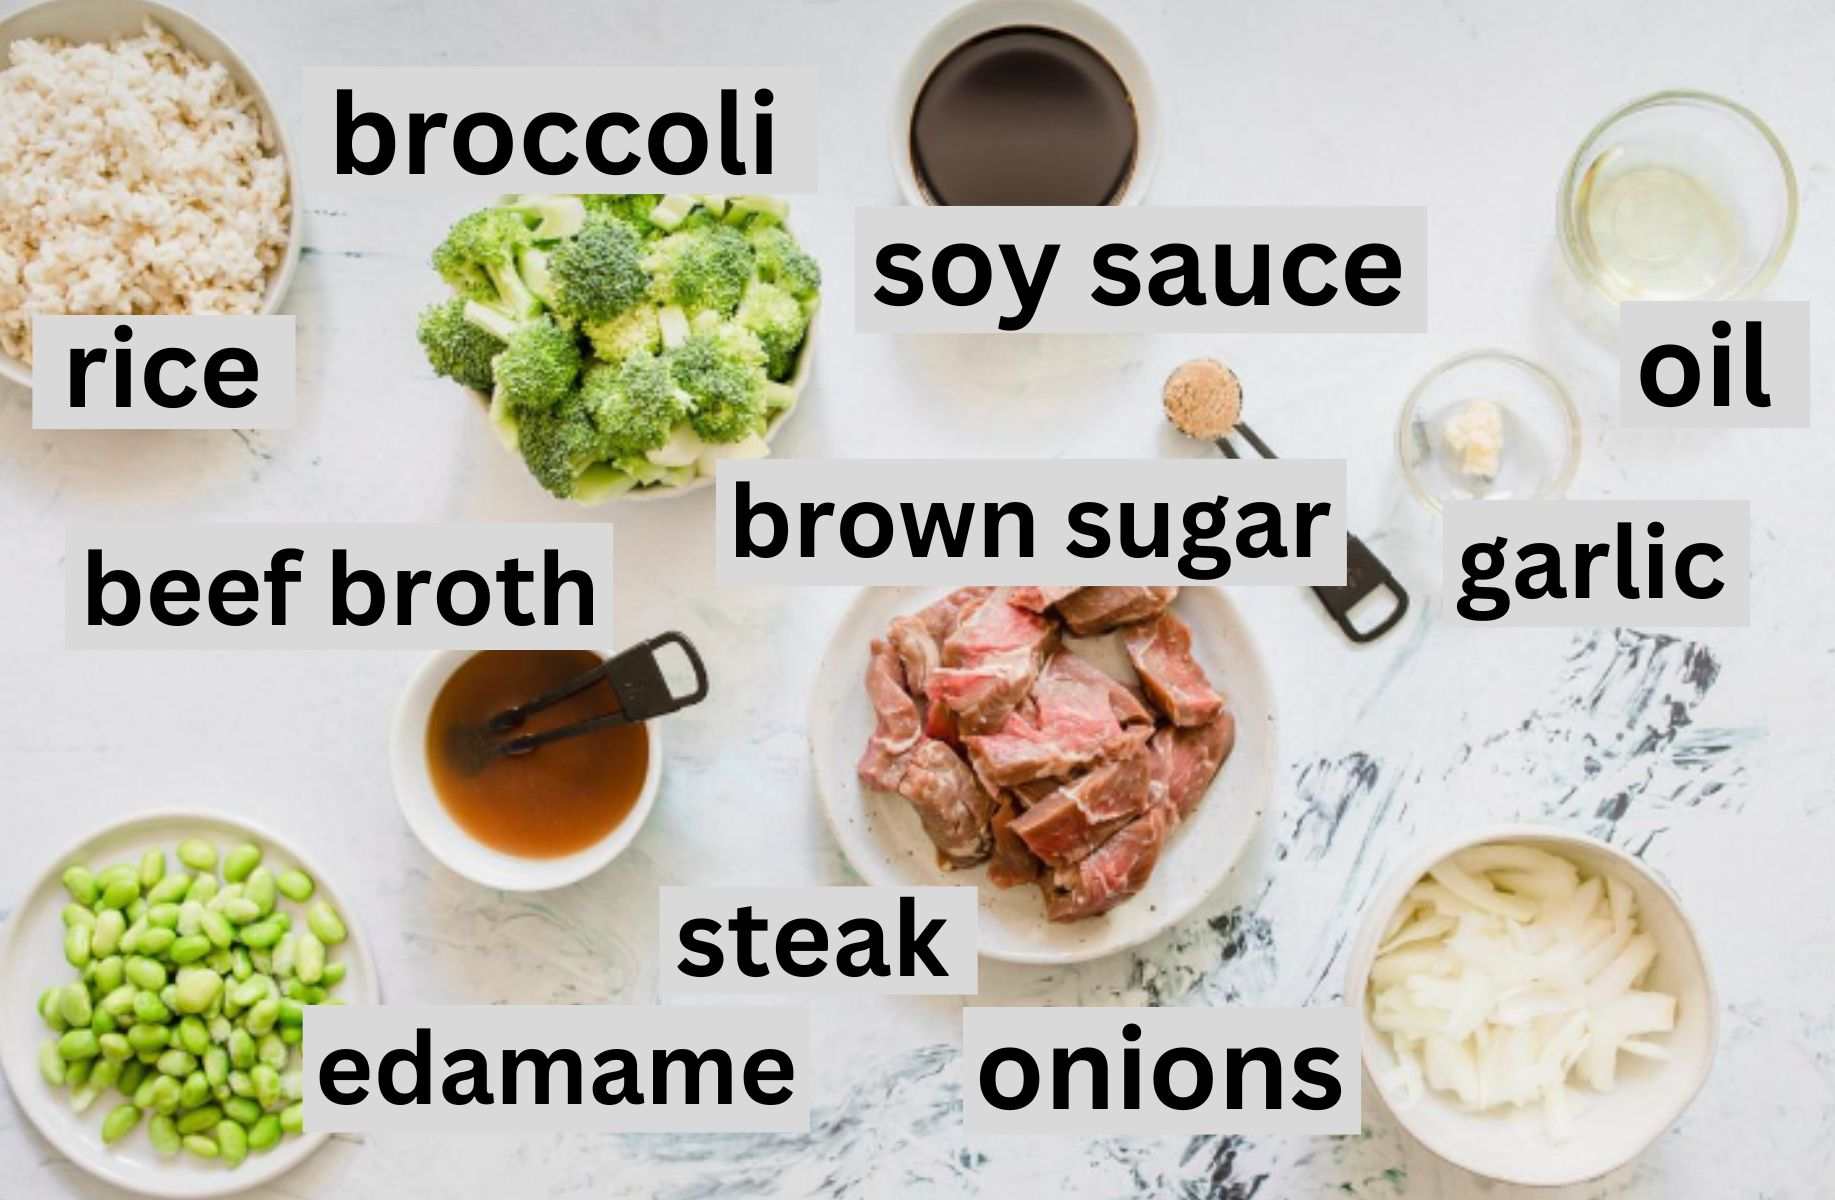 ingredients for beef and broccoli on a table